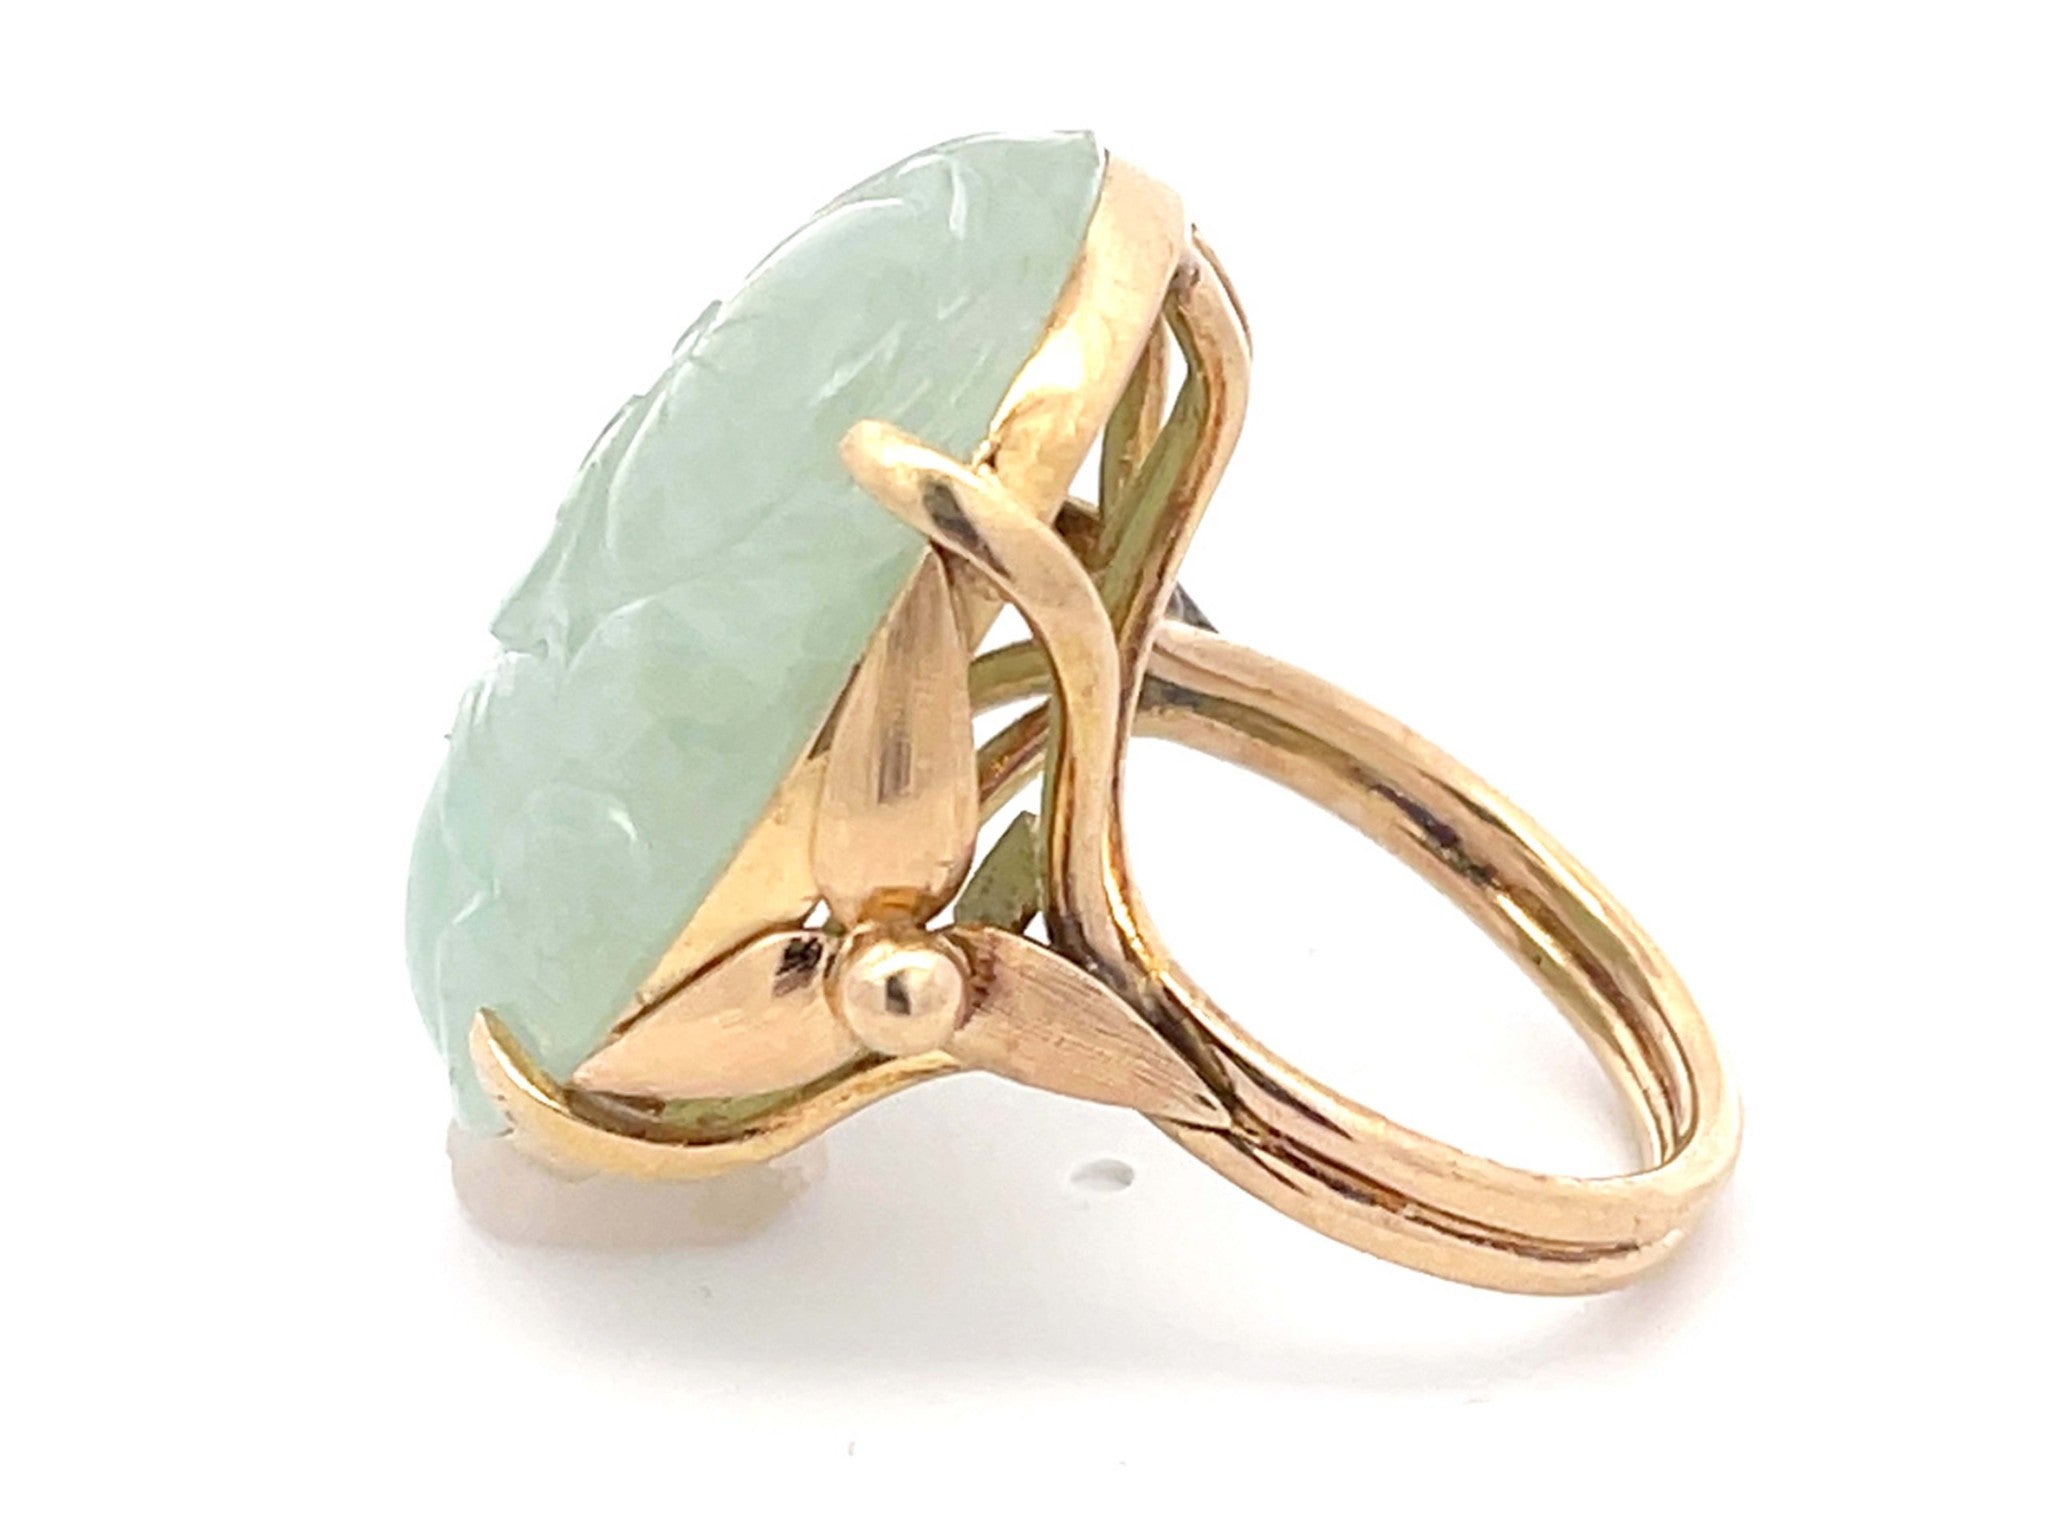 Large Oval Carved Cabochon Pale Green Jade Ring in 14k Yellow Gold